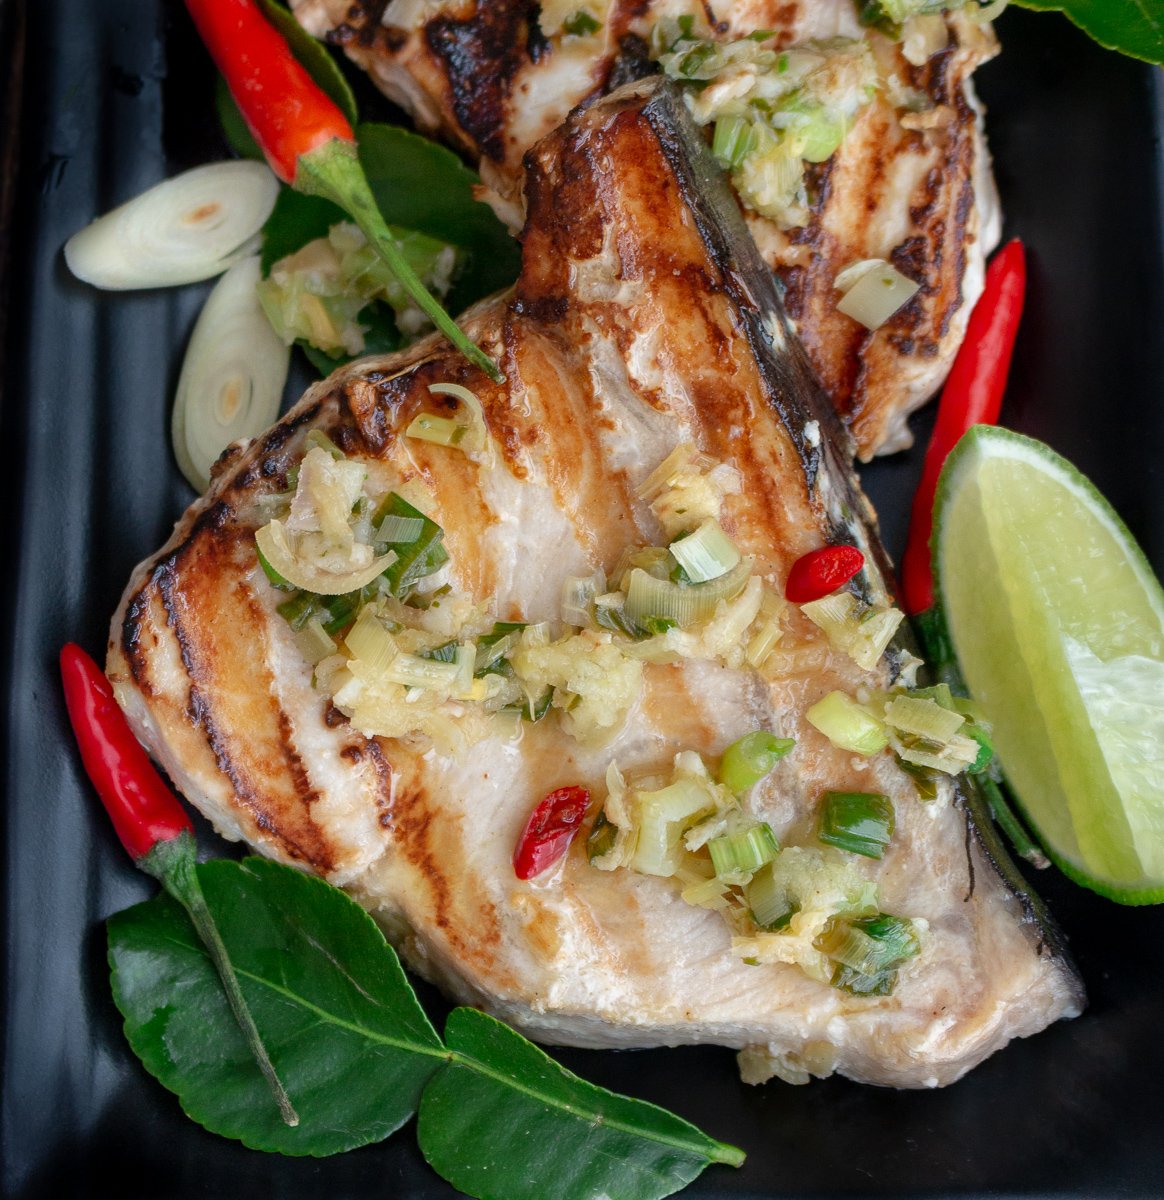 Tropical Thai Swordfish just hot off the grill, topped with lemongrass sauce and chilis, and limes on a black plate with perfect grill marks.